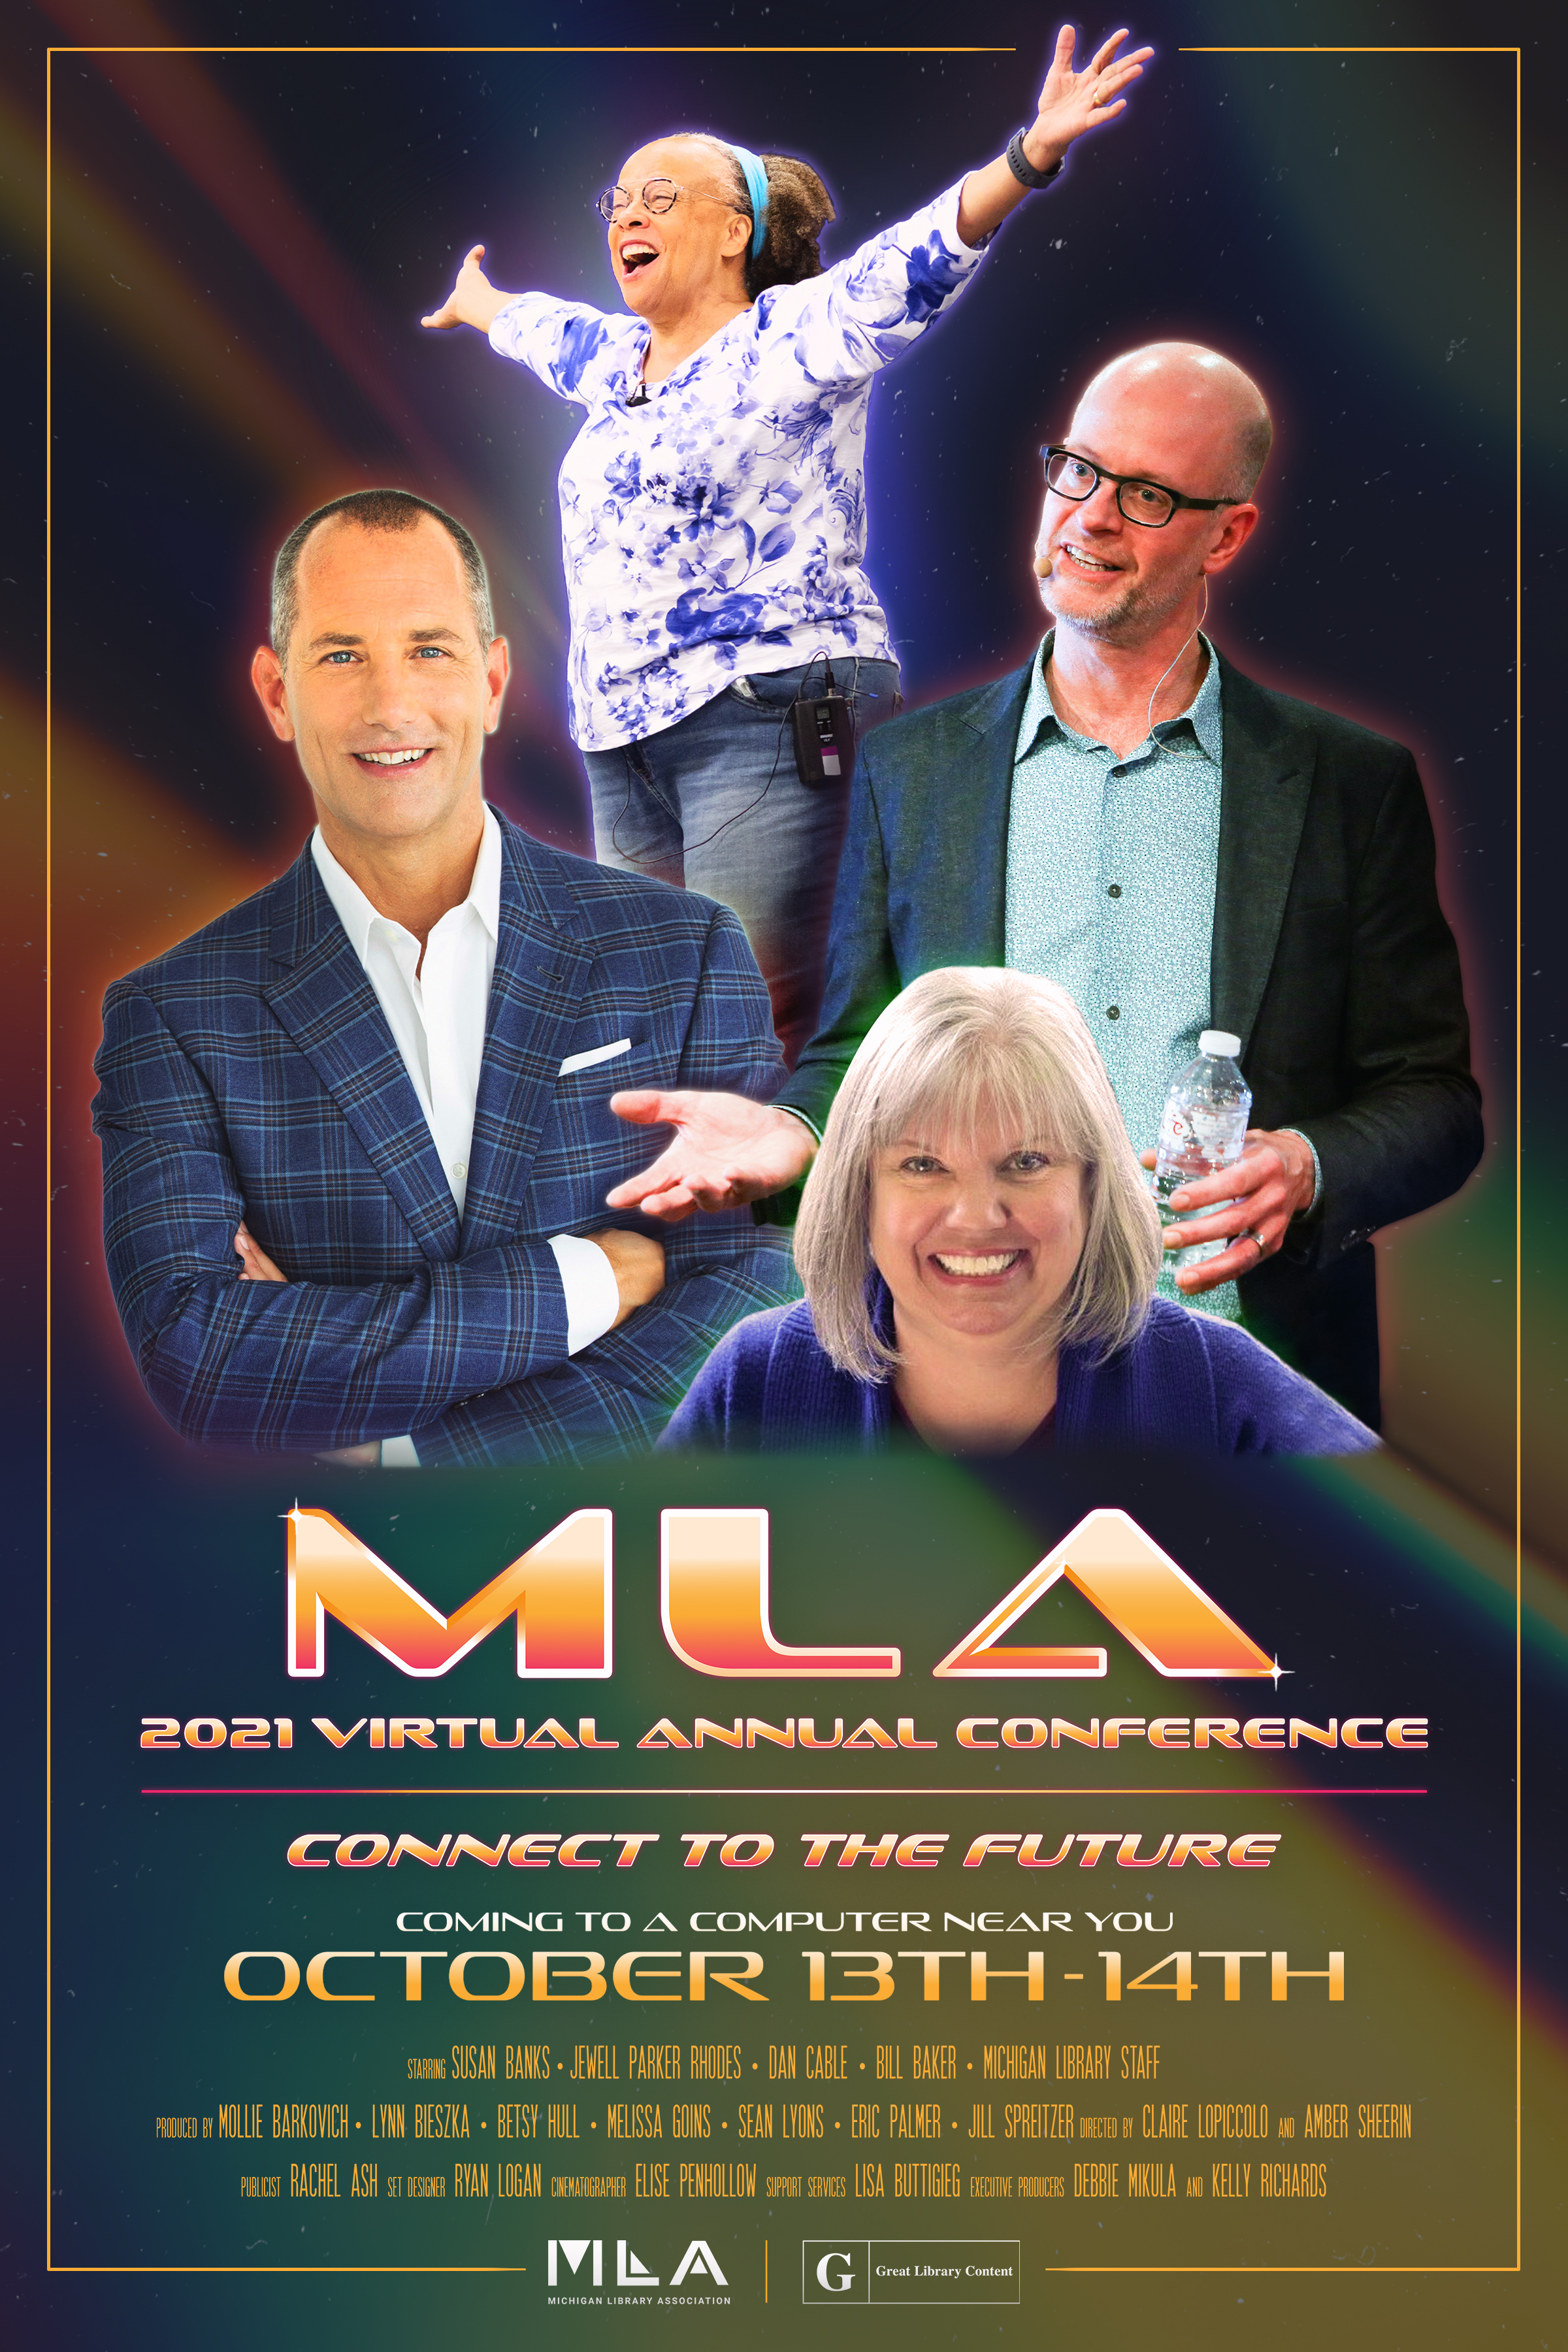 MLA 2021 conference promo poster with speaker photos and logo